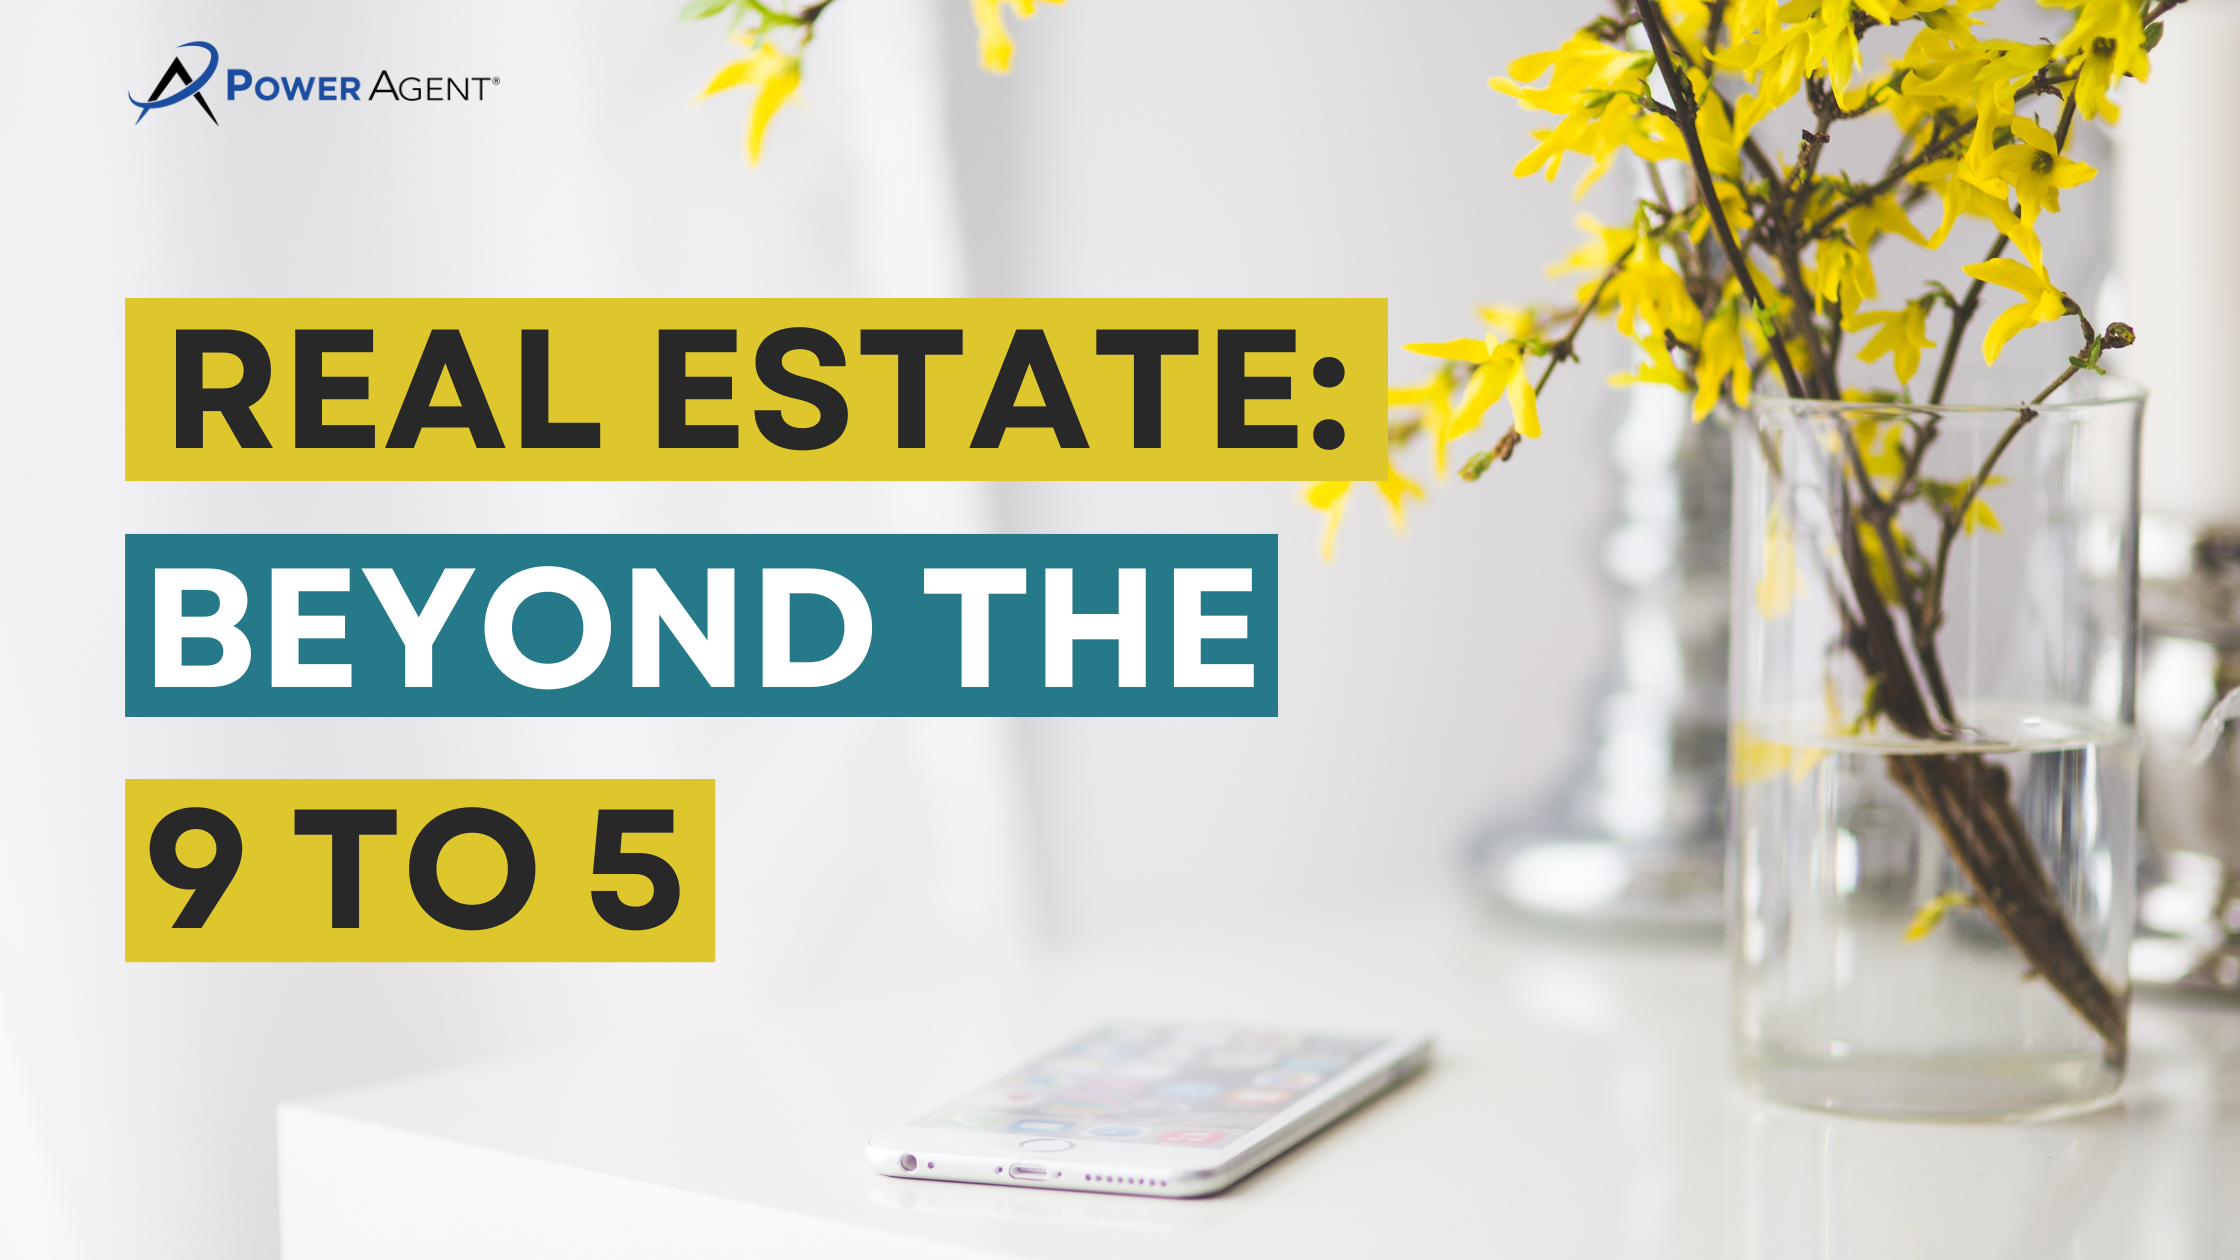 Real Estate: Beyond the 9 to 5 - Embracing the Agent Life